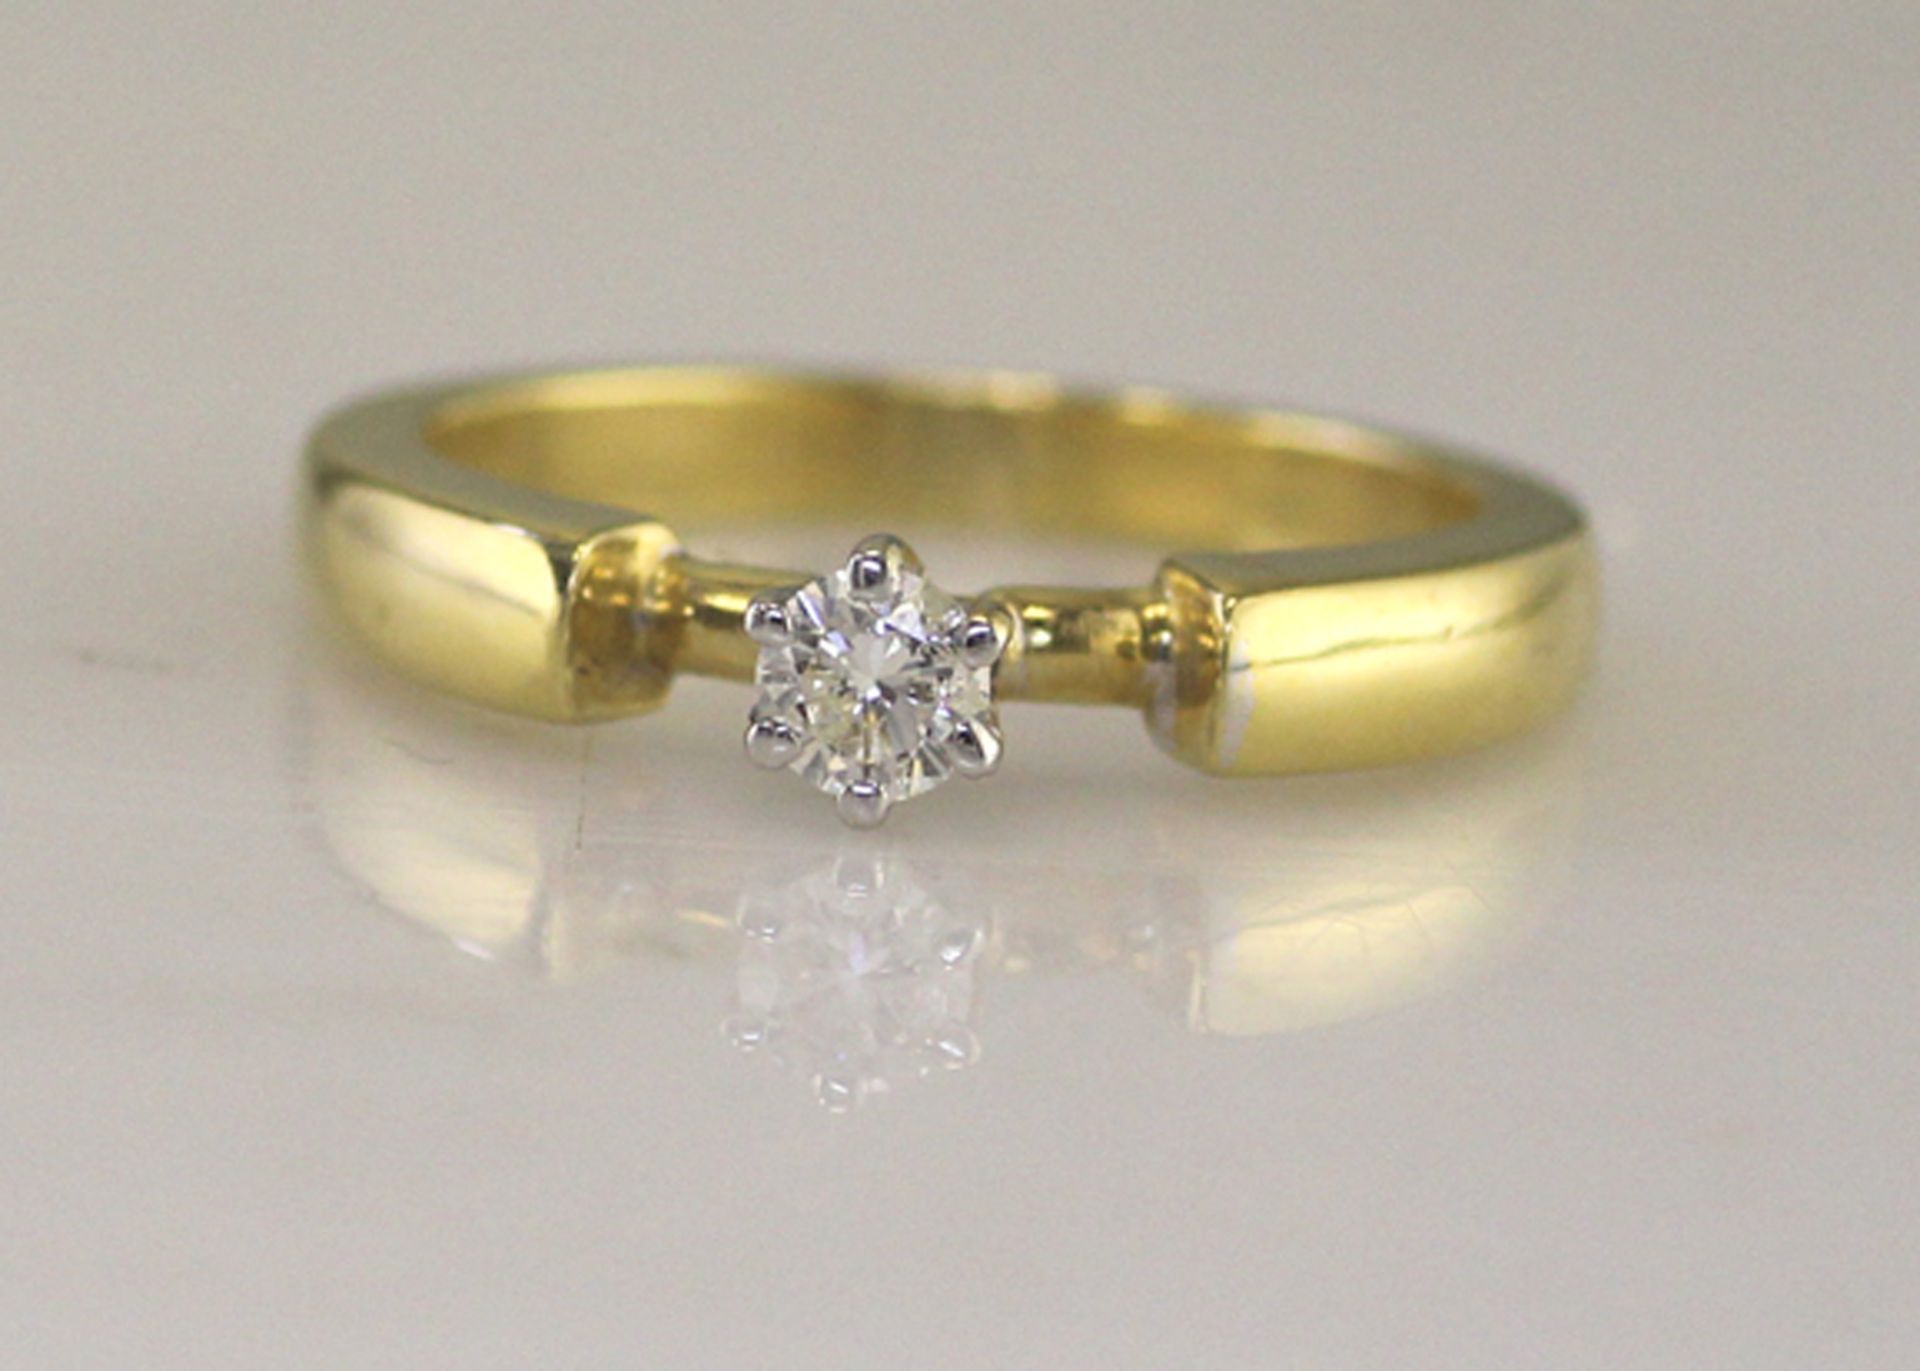 18ct Single Stone Fancy Claw Set Diamond Ring 0.20 Carats - Valued By GIE £3,790.00 - A beautiful - Image 7 of 9